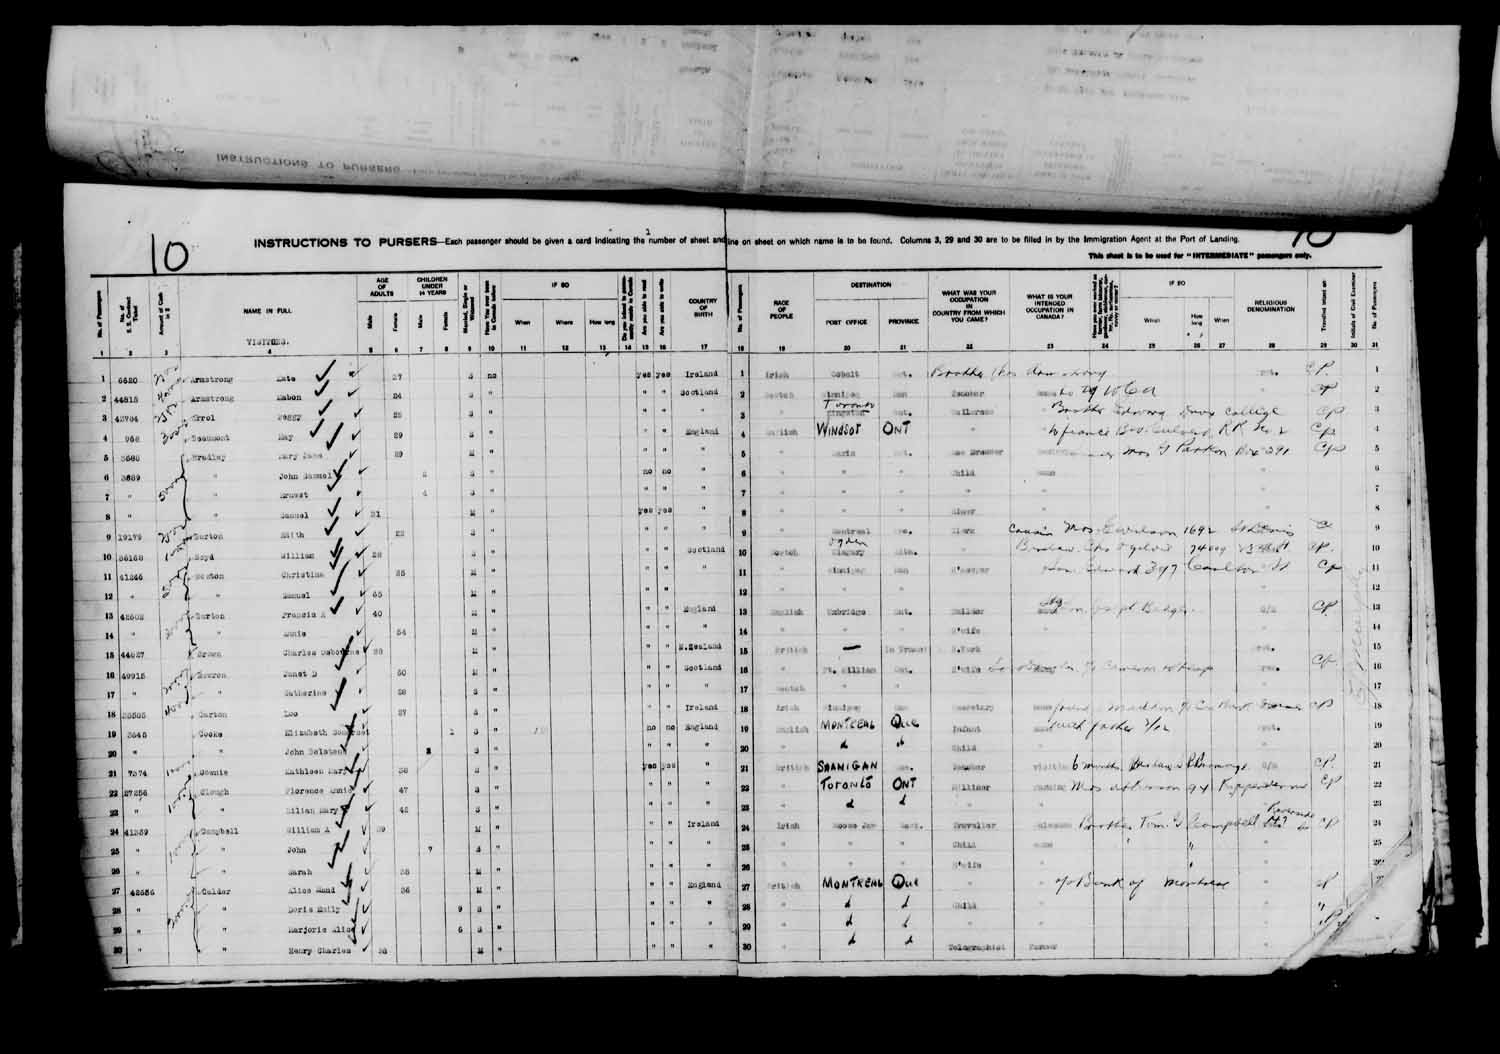 Digitized page of Passenger Lists for Image No.: e003610617